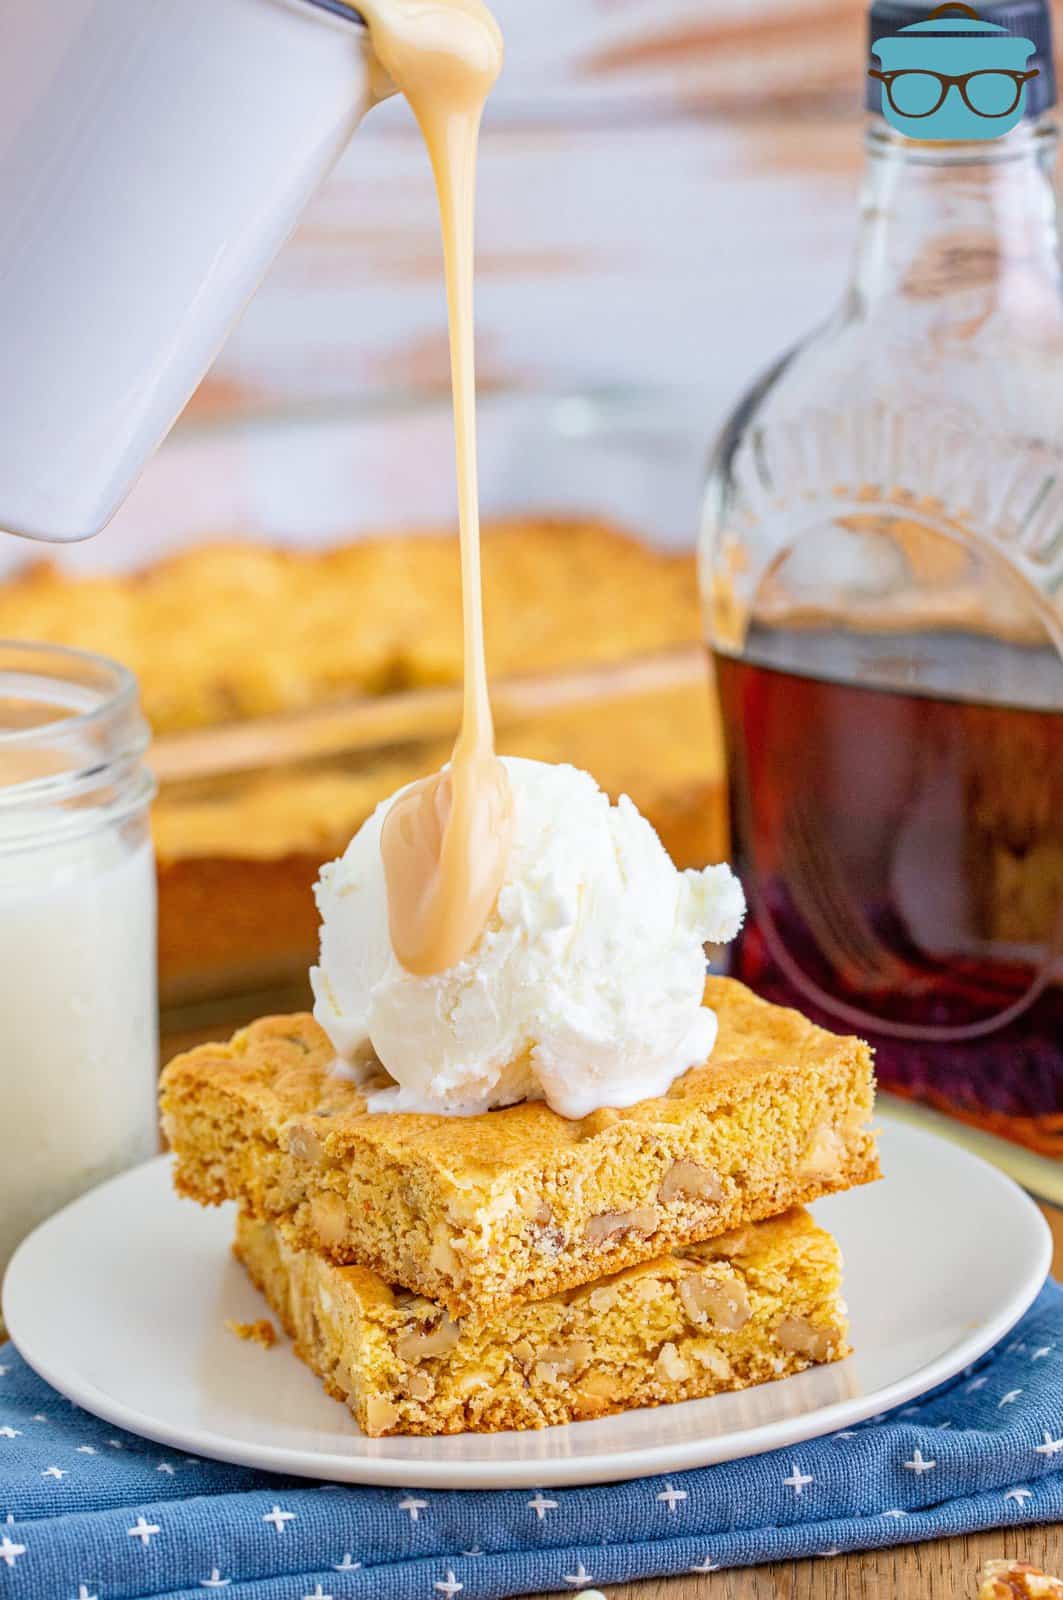 maple butter sauce being shown pouring on top of two slices of blondies on a white plate.